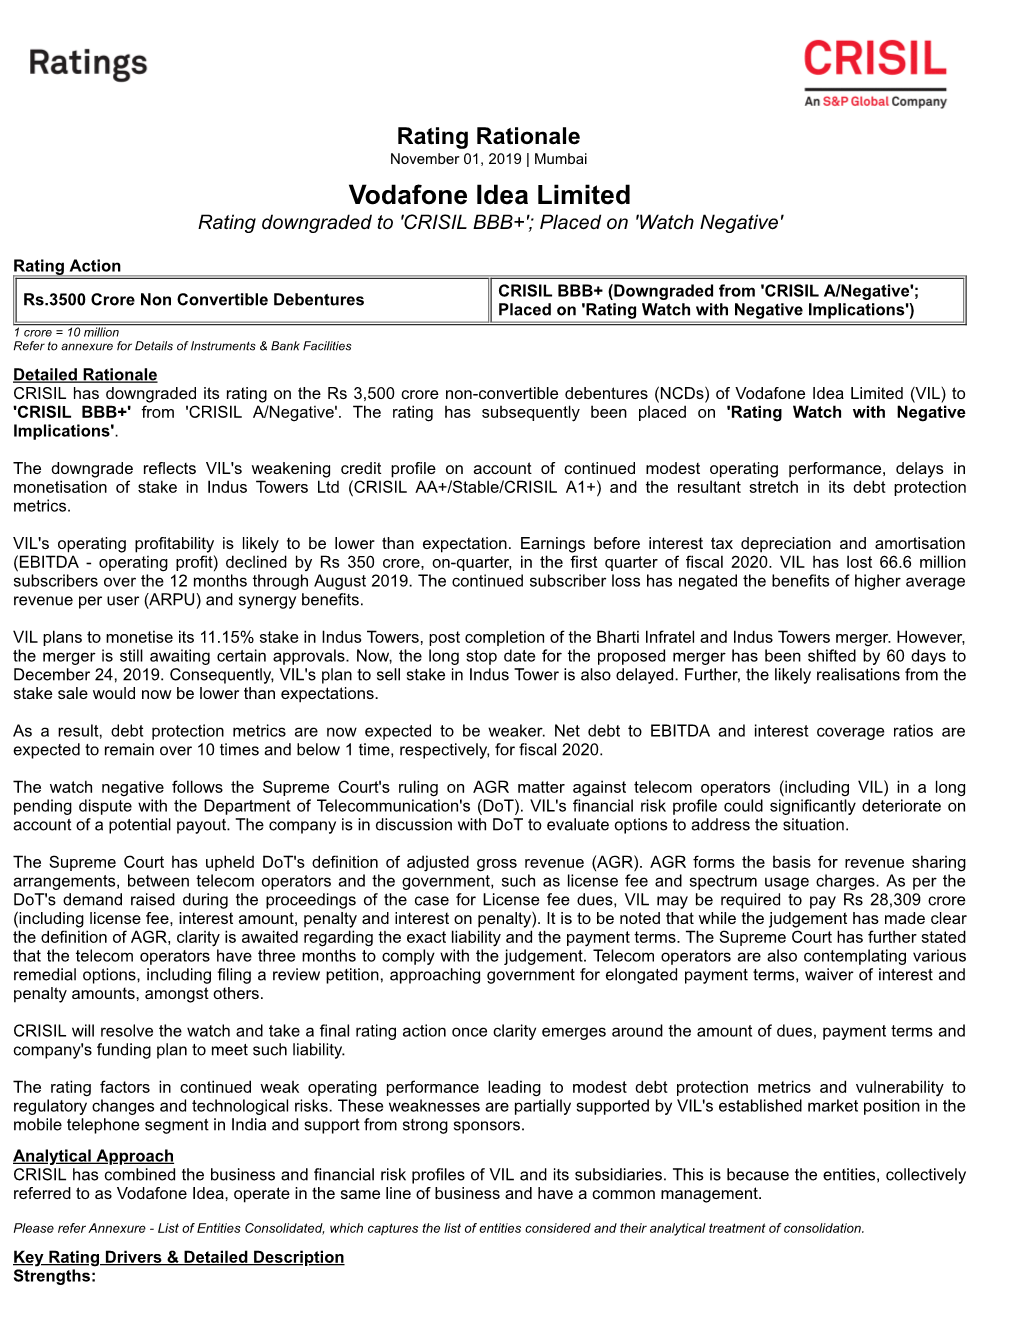 Vodafone Idea Limited Rating Downgraded to 'CRISIL BBB+'; Placed on 'Watch Negative'